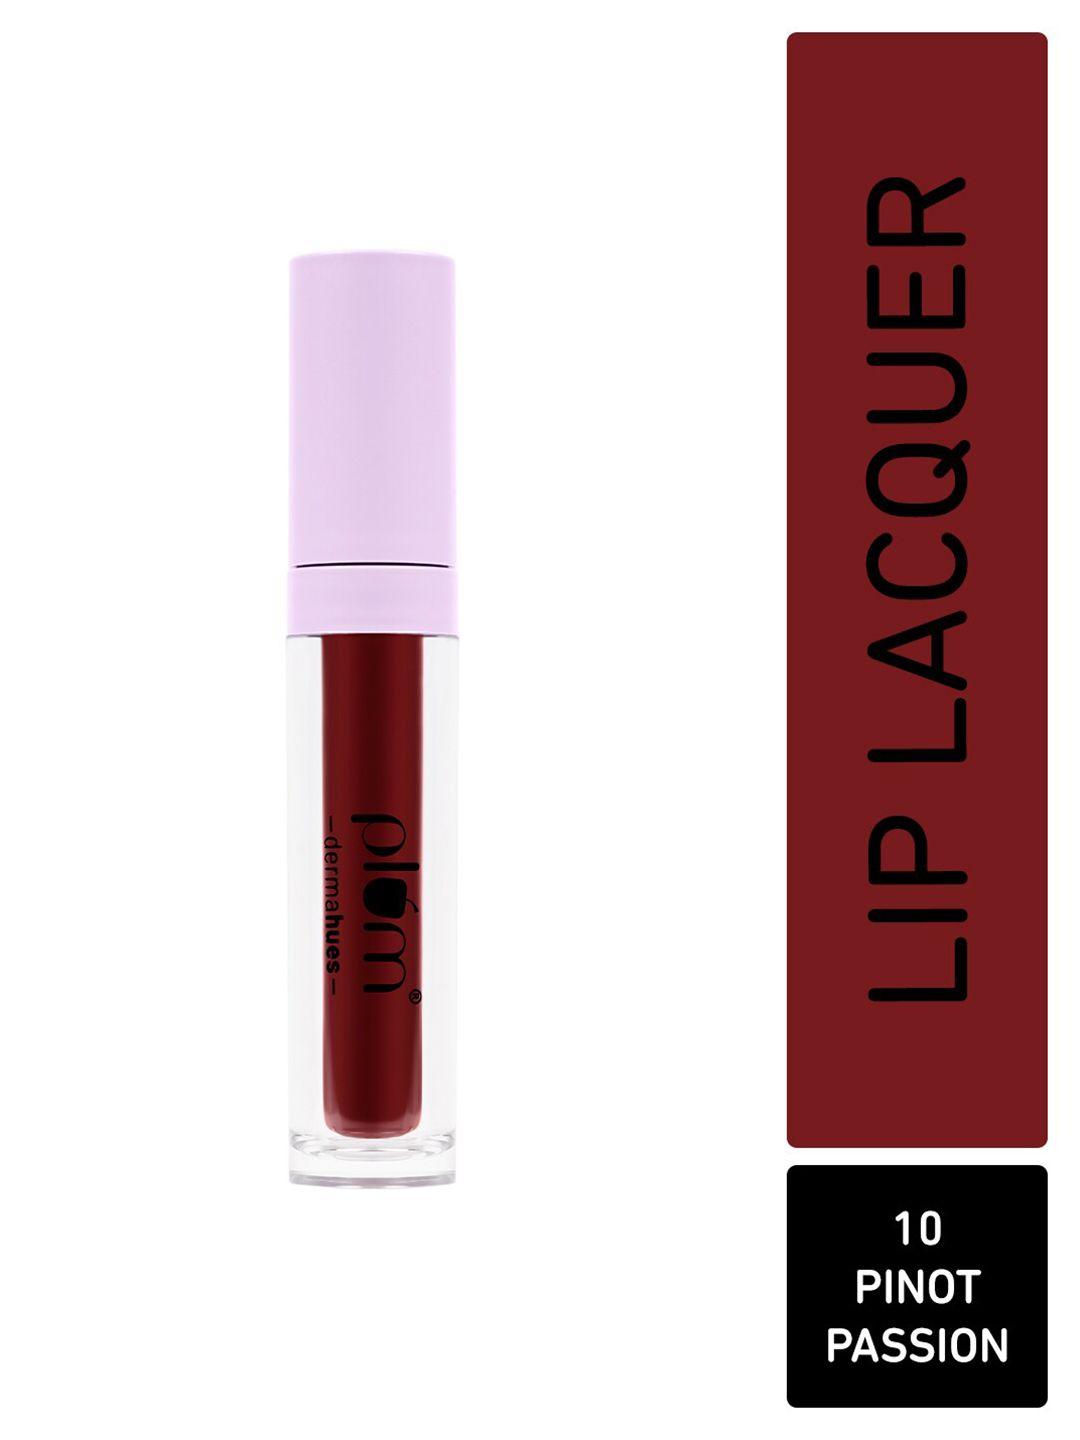 plum glassy glaze 3-in-1 velvety smooth lip lacquer with jojoba 4.5ml - pinot passion 10